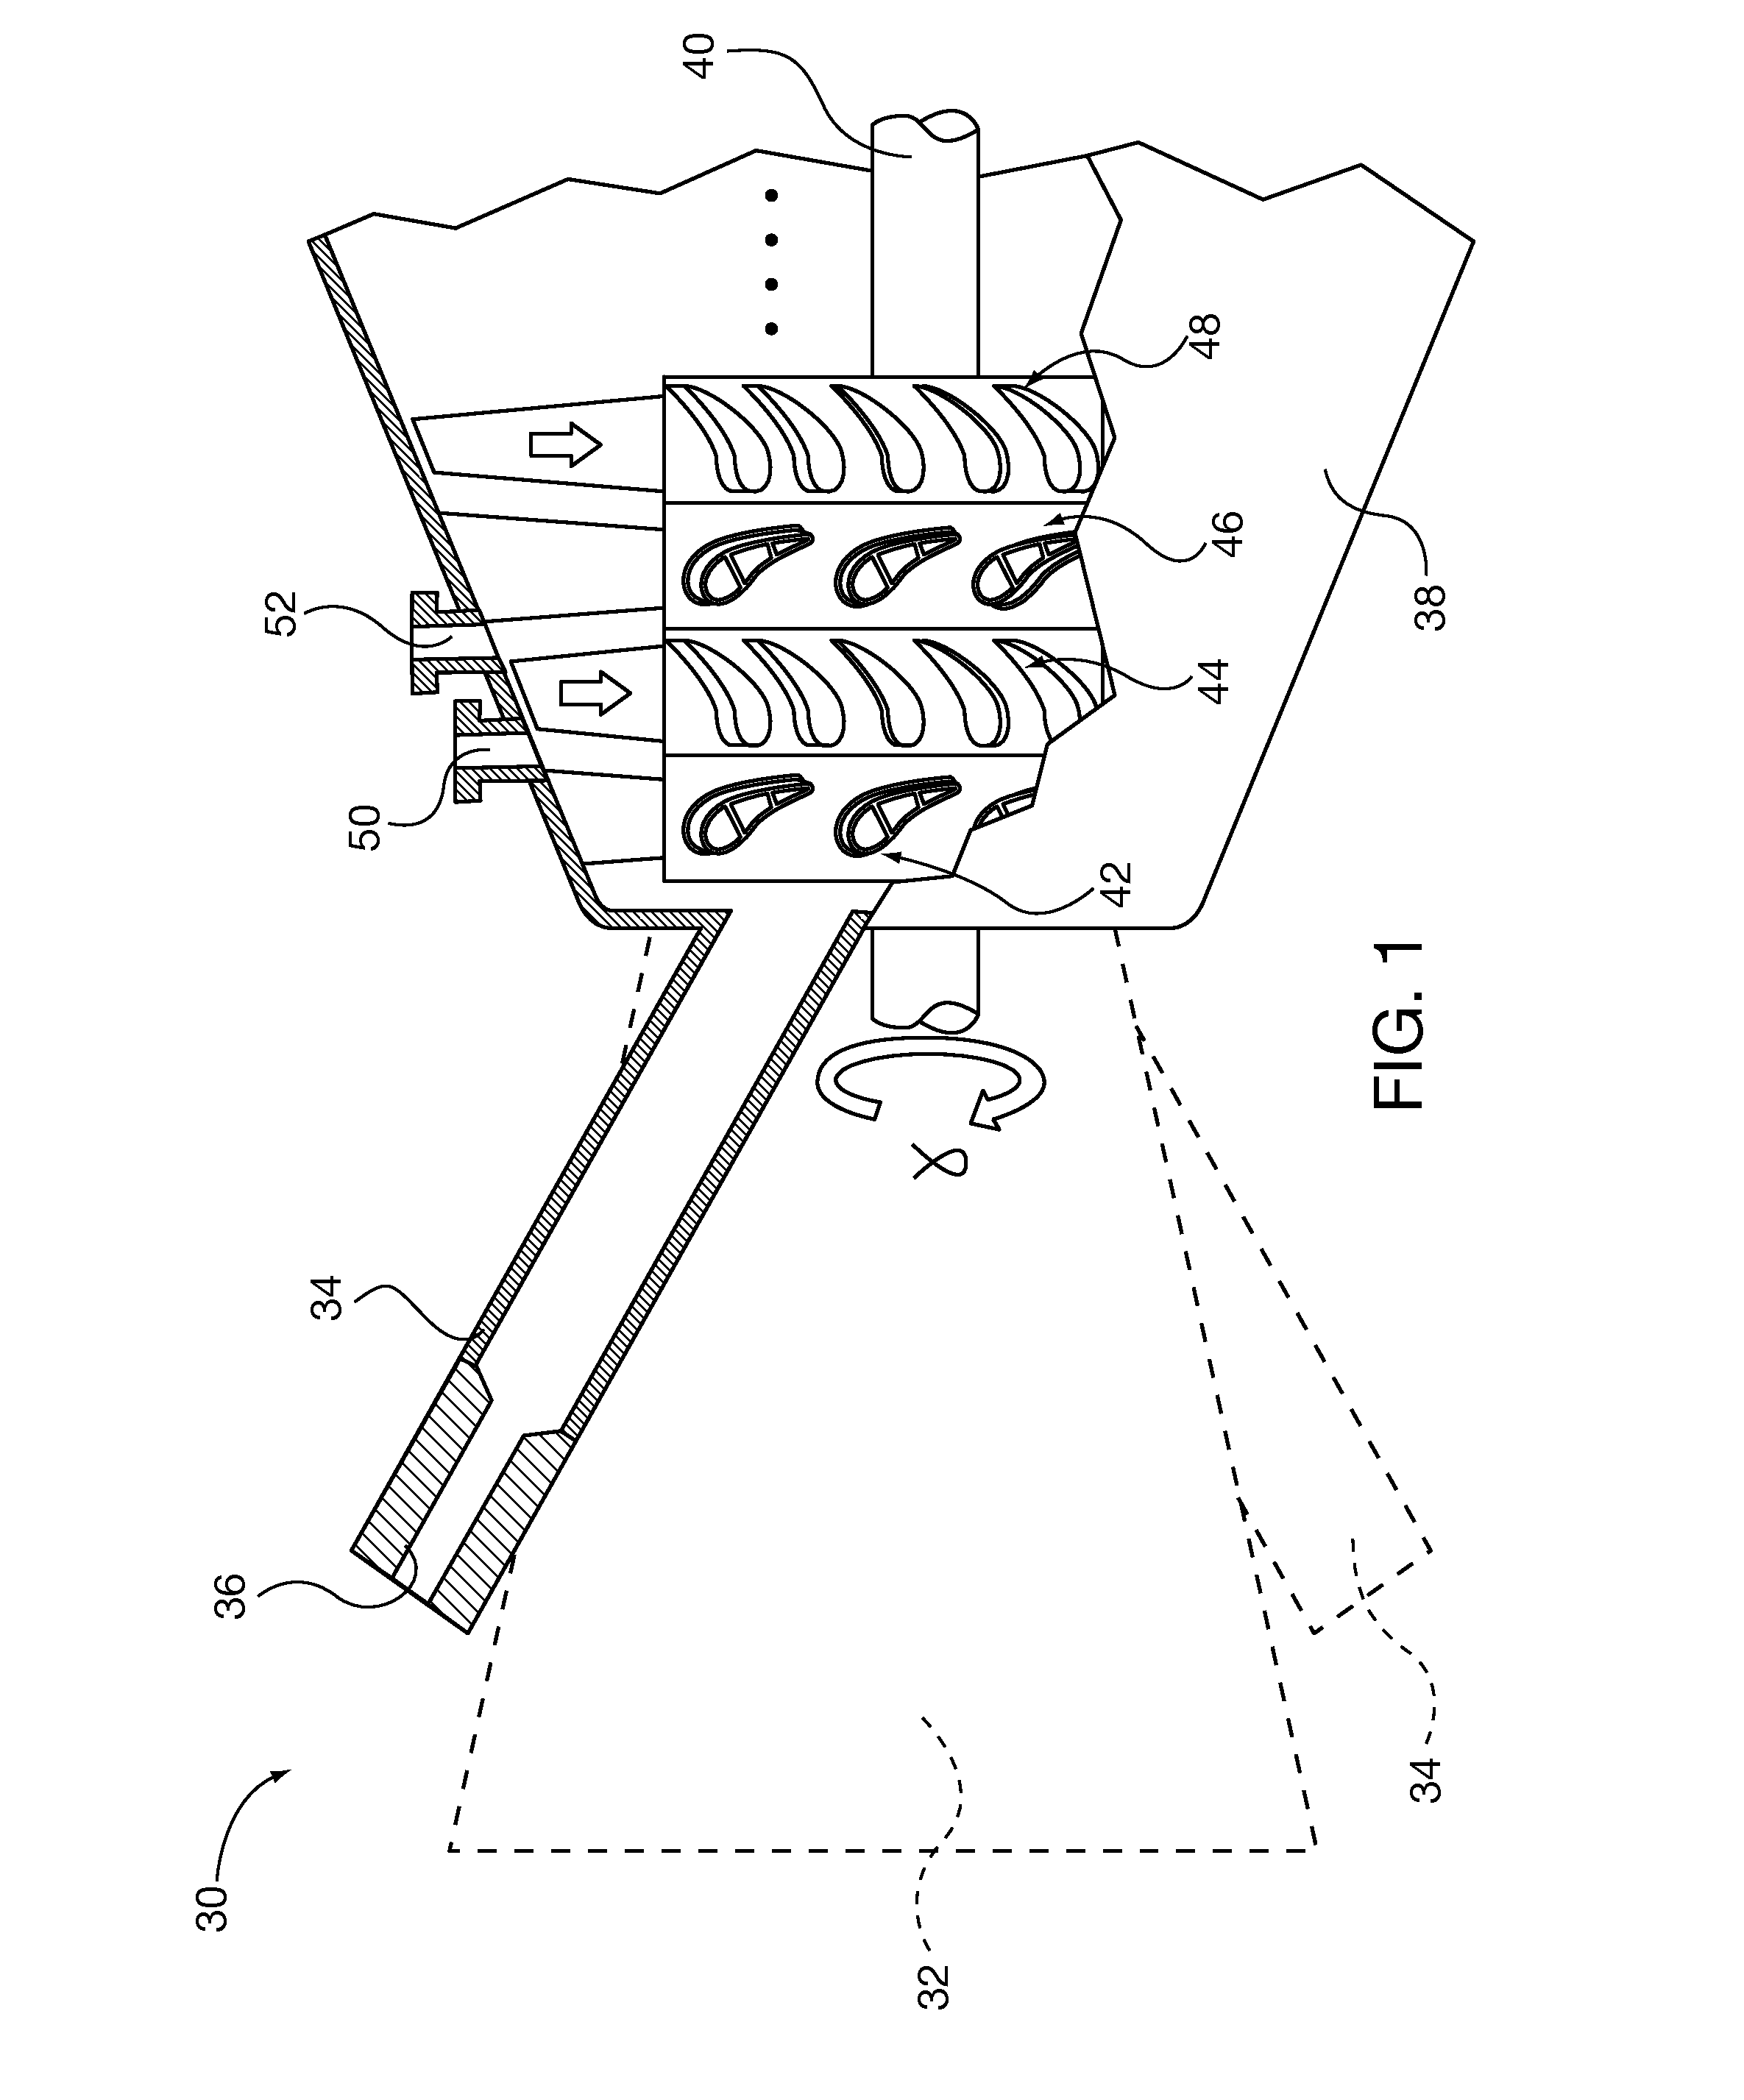 System and method for automated optical inspection of industrial gas turbines and other power generation machinery with articulated multi-axis inspection scope